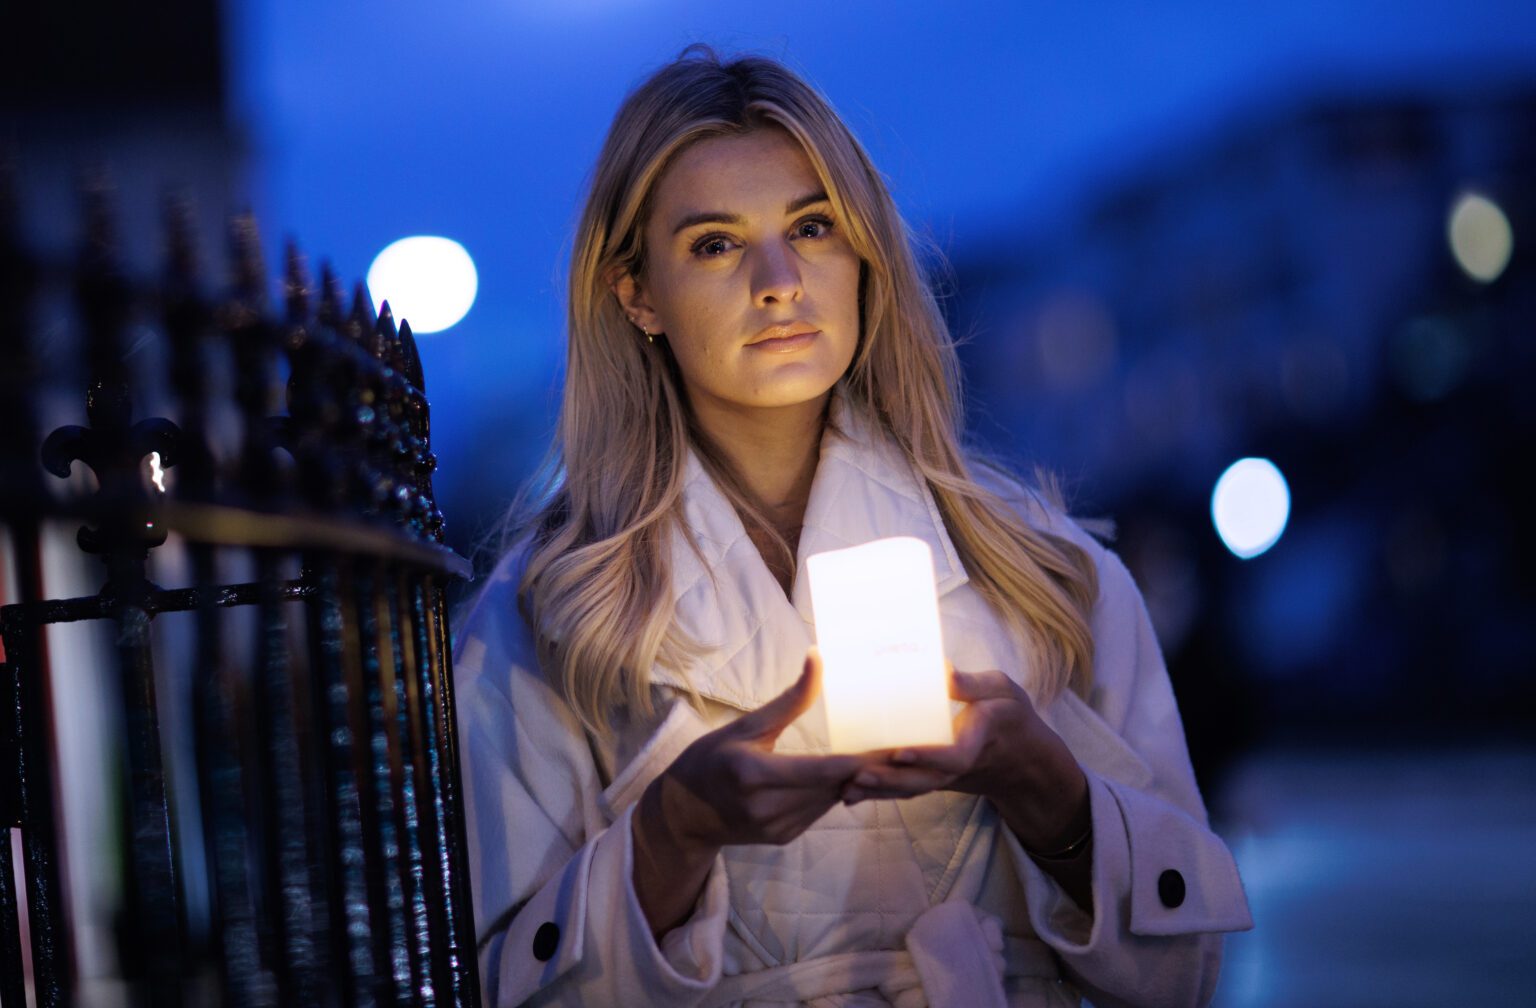 Pietas Christmas Campaign - Pictured at the launch of Pieta’s Christmas campaign, #HopeOverSilence, Pieta ambassador Louise Cooney Picture: INPHO/James Crombie